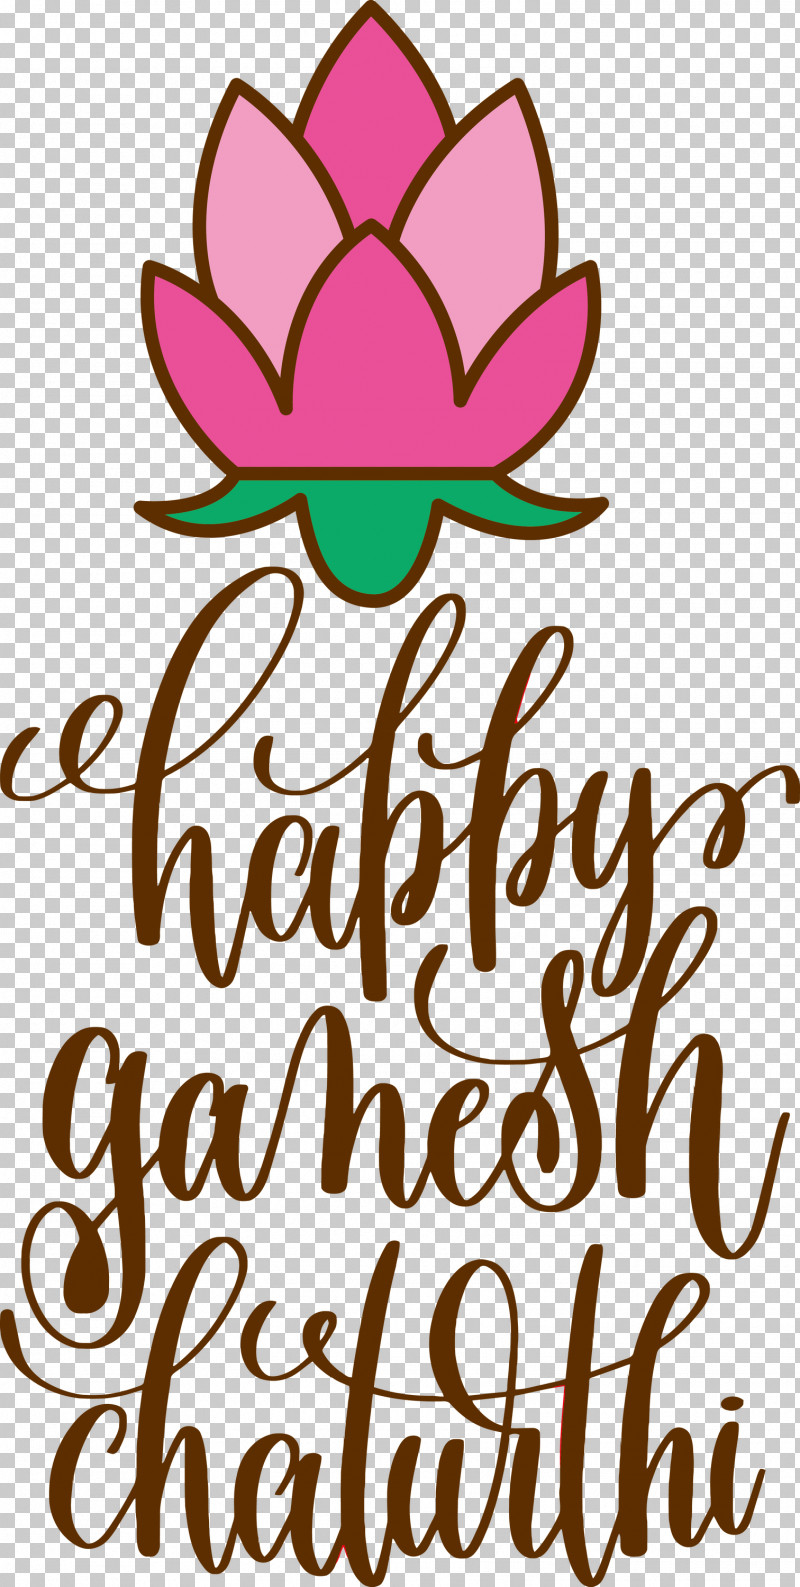 Happy Ganesh Chaturthi PNG, Clipart, Floral Design, Flower, Happy Ganesh Chaturthi, Leaf, Logo Free PNG Download